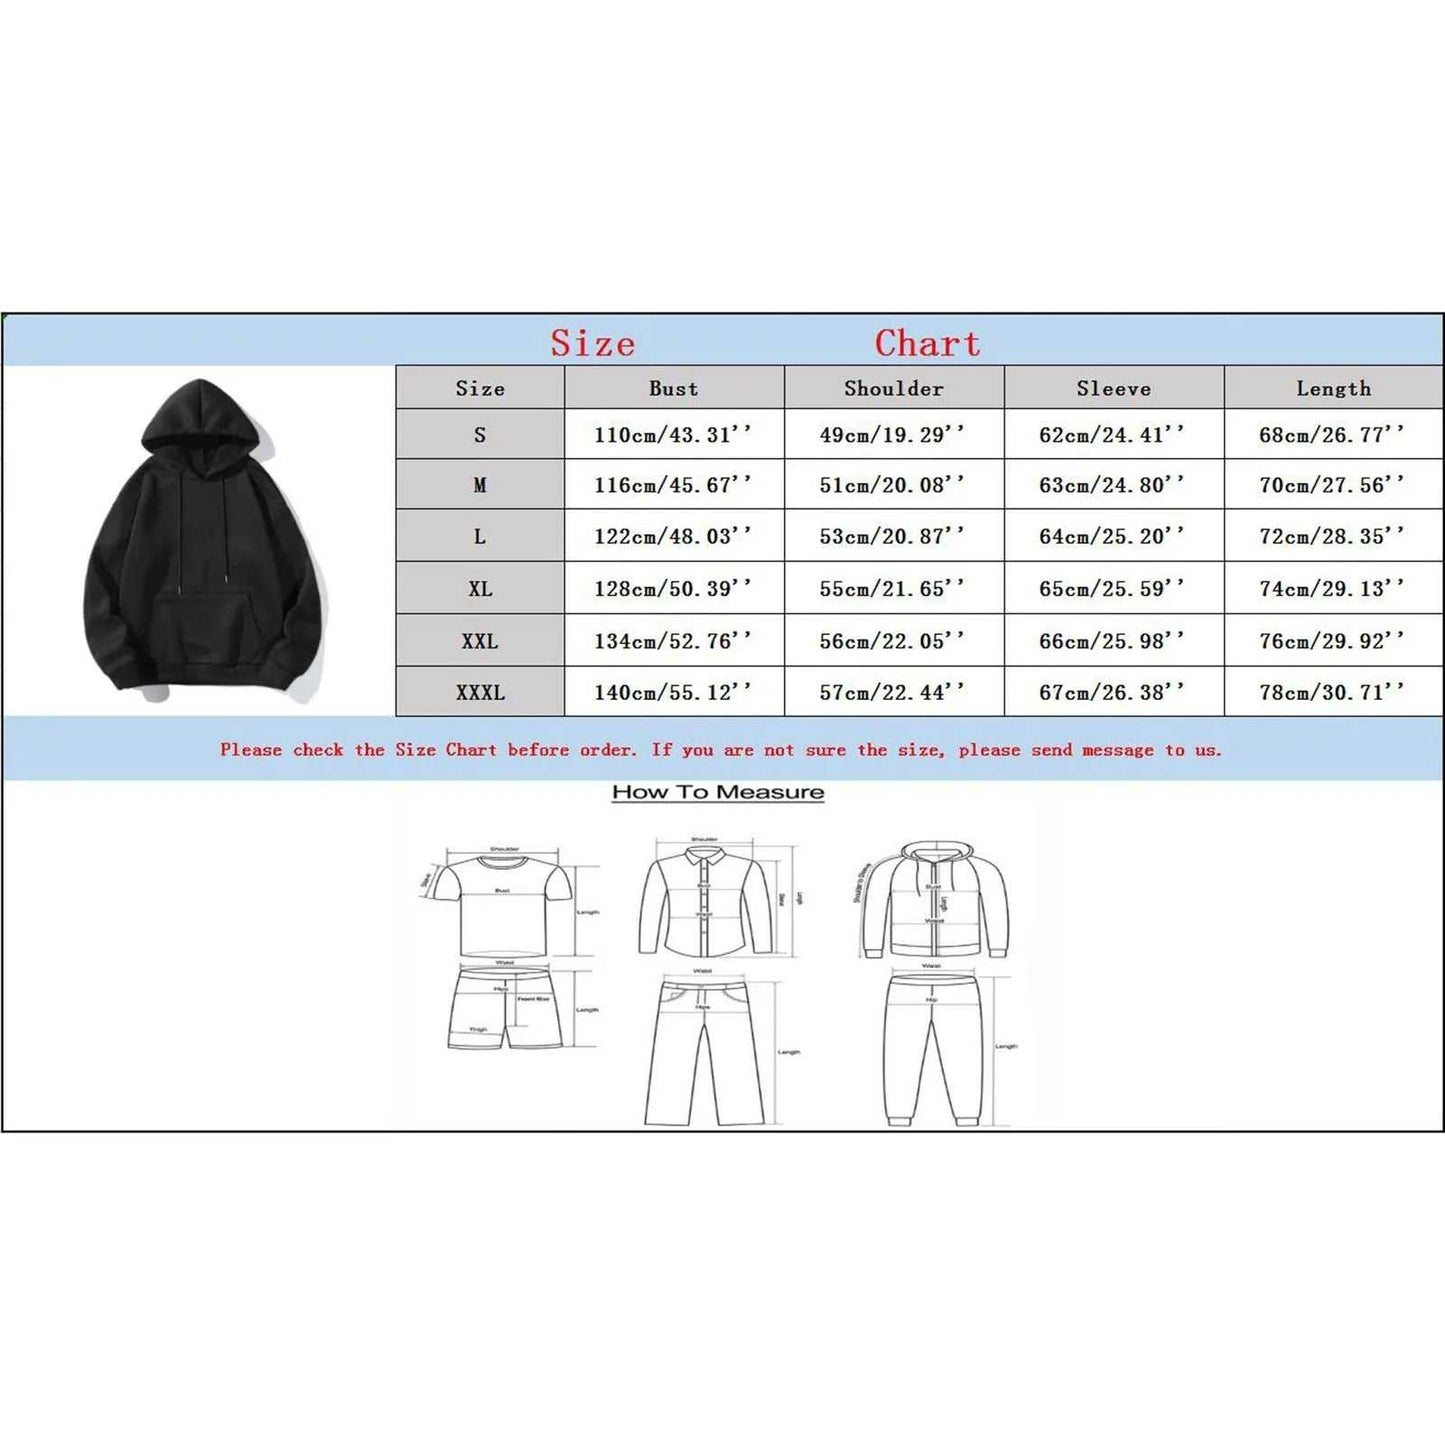 2024 Miami Letter Printed Hoodies For Men Streetwear 20 Ryan fashion product Ryan fashion product 14:771#Beige;200007763:201336106;5:4183#XXXL 20 $ Ryan fashion product